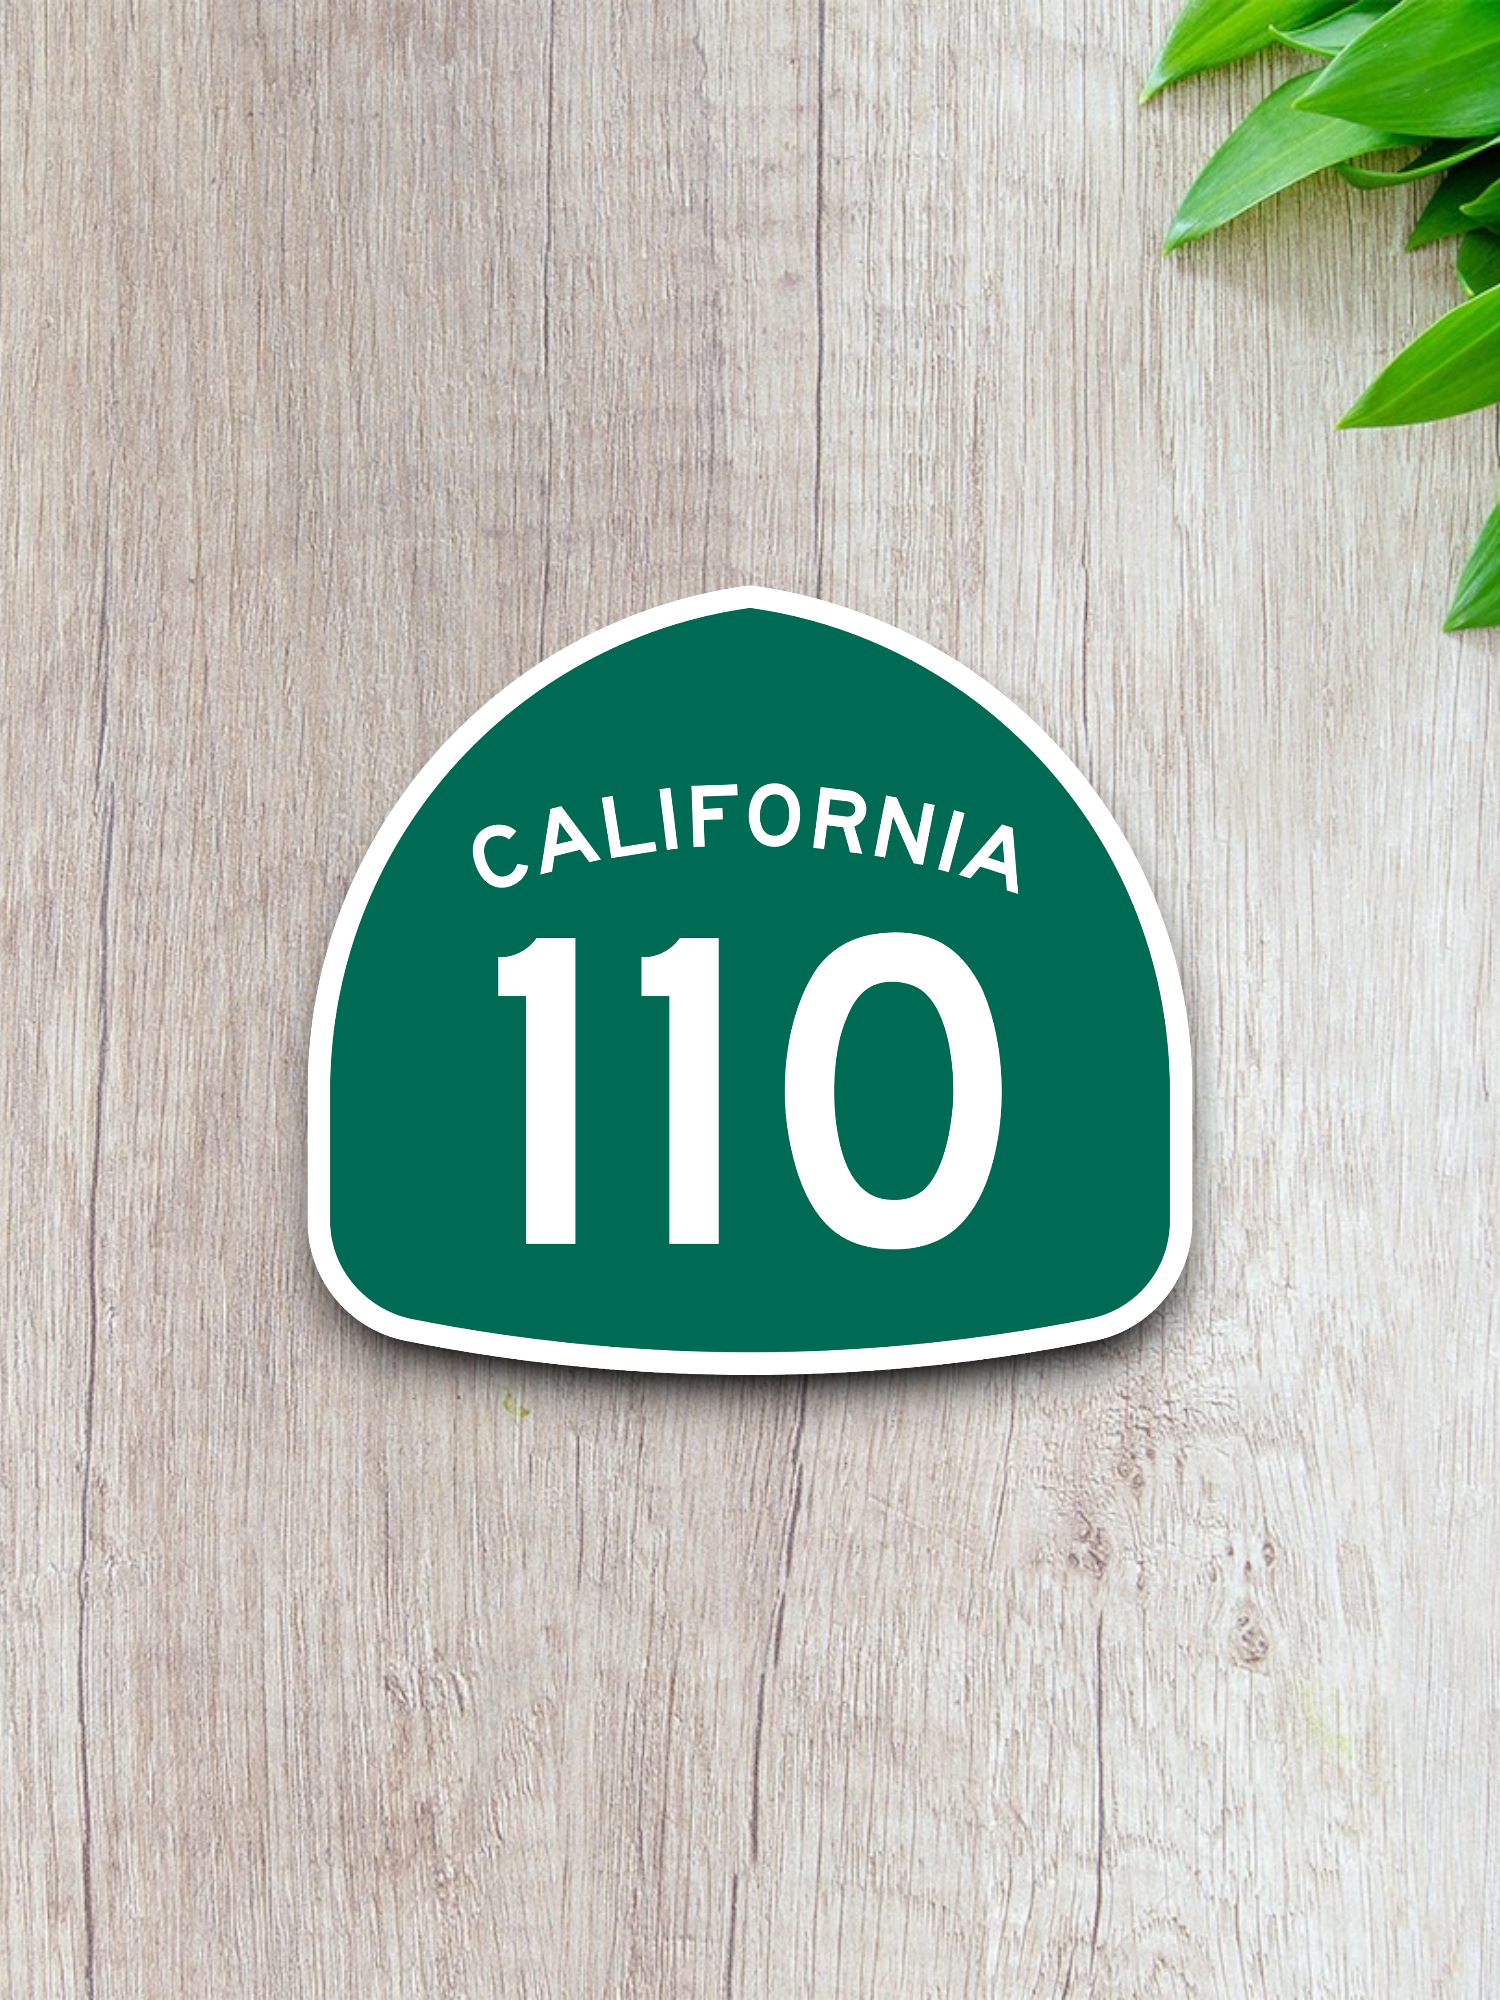 California State Route 110 Road Sign Sticker